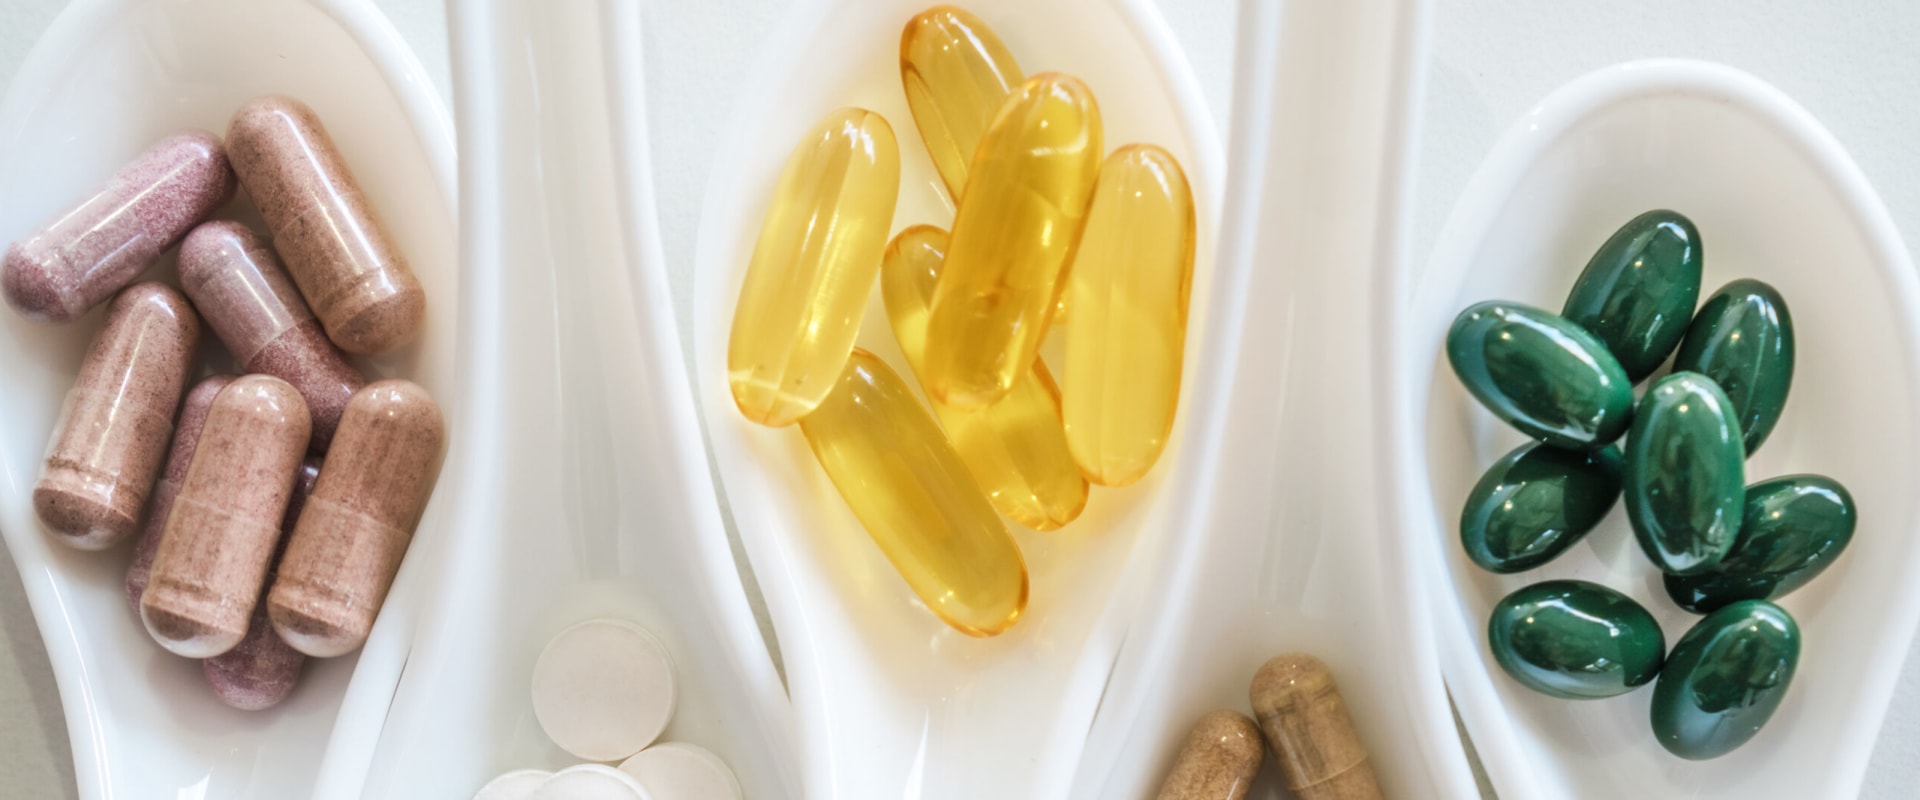 Are supplement claims regulated?